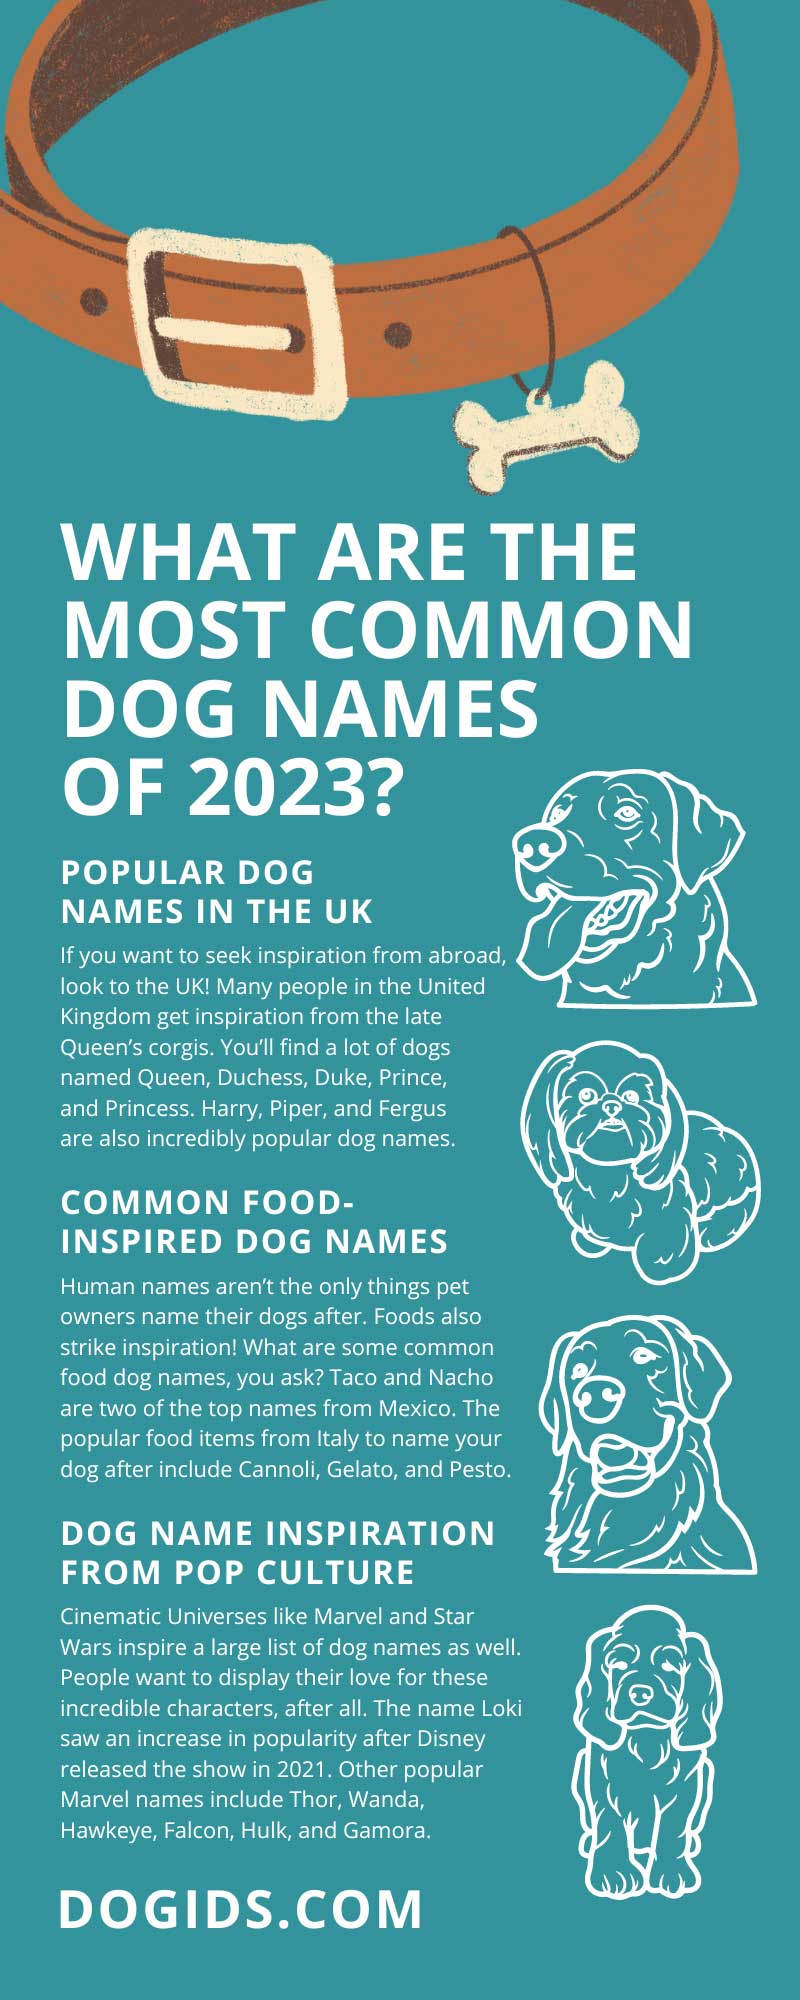 What Are the Most Common Dog Names of 2023?